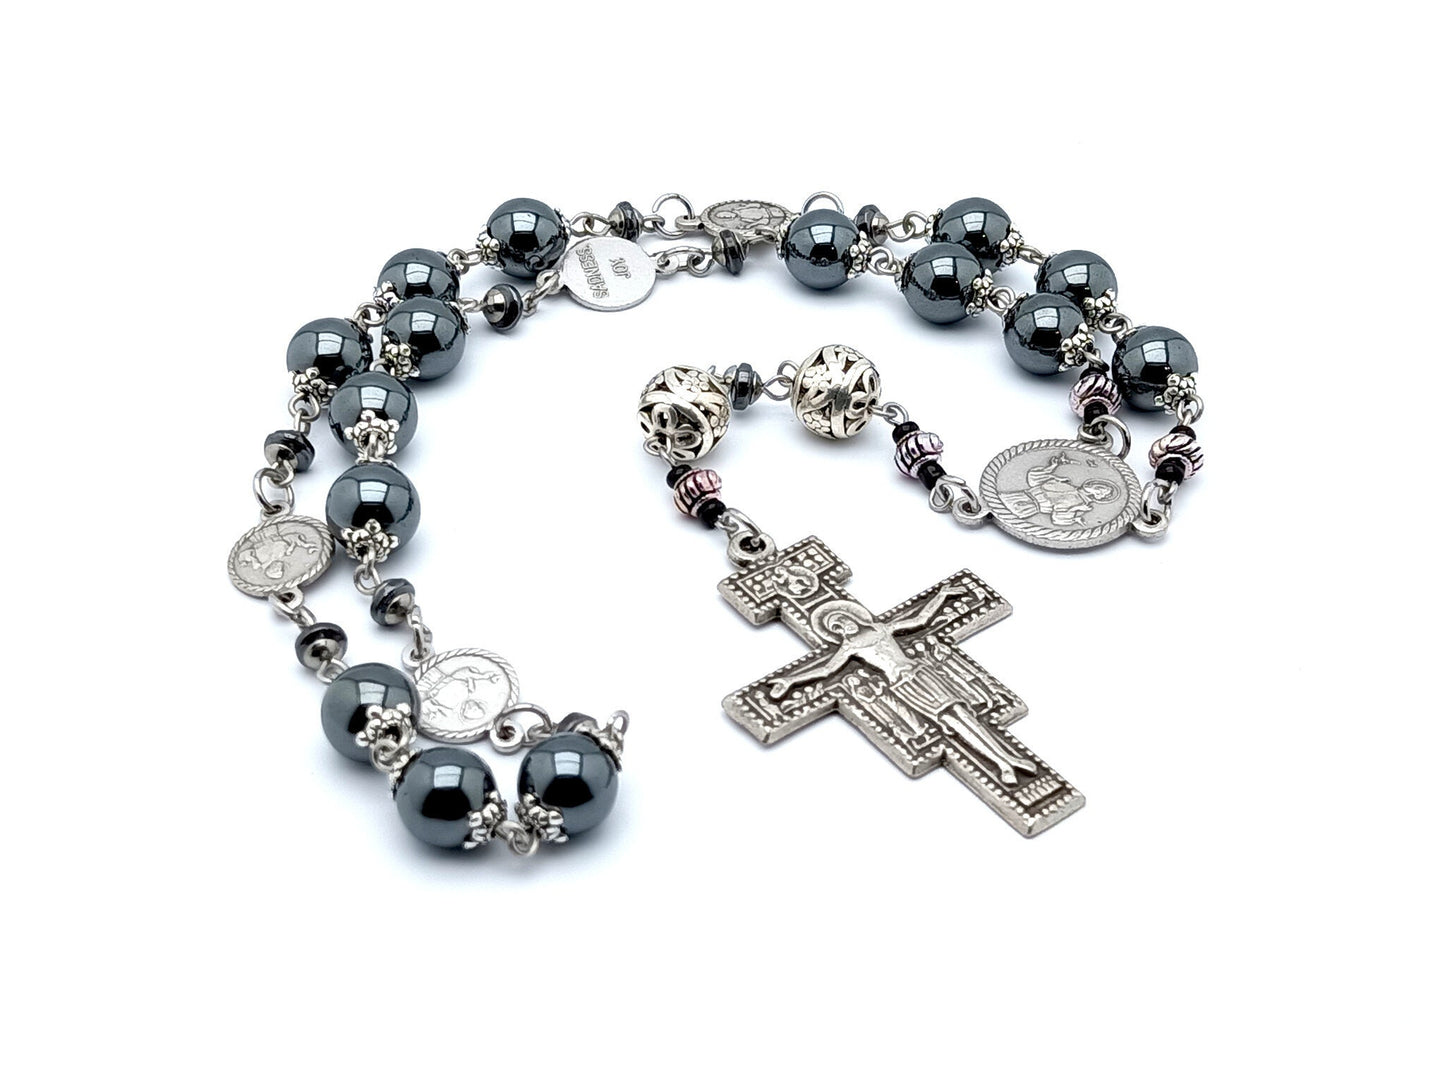 Saint Francis of Assisi unique rosary beads prayer chaplet with hematite gemstone and tibetan silver beads and Saint Francis prayer crucifix.